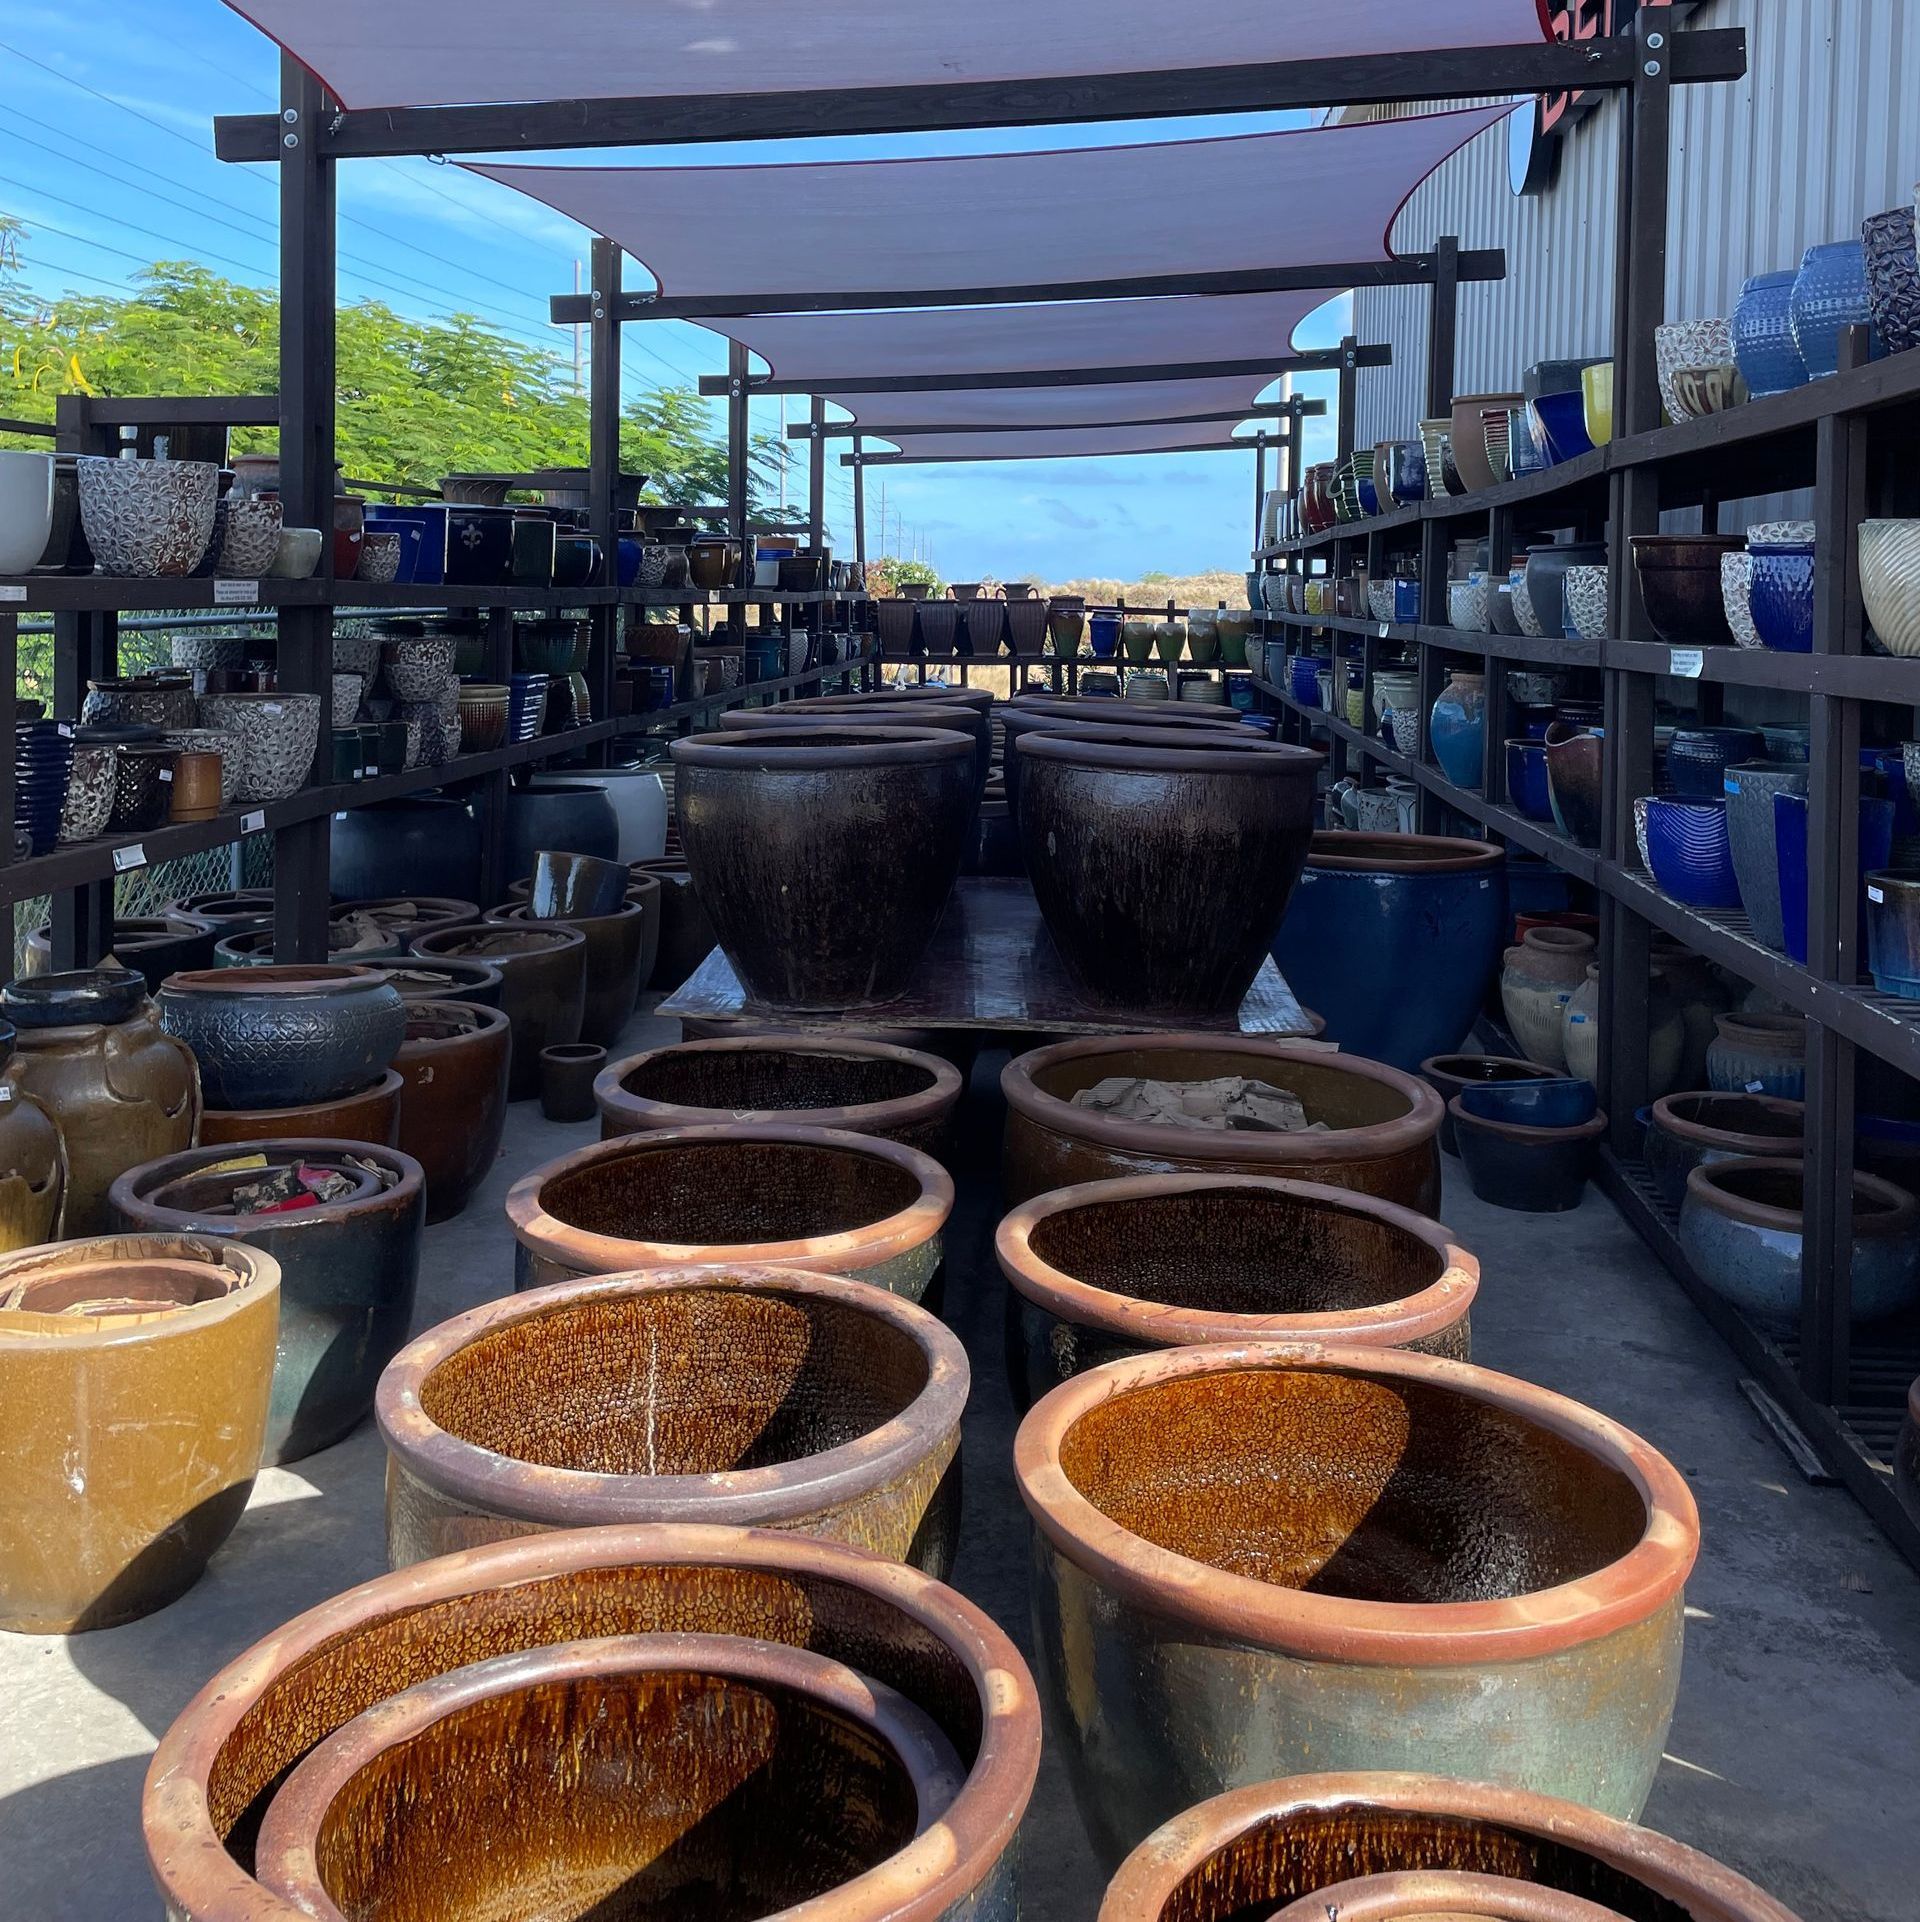 Pottery, Ceramic pots, Container Gardening 